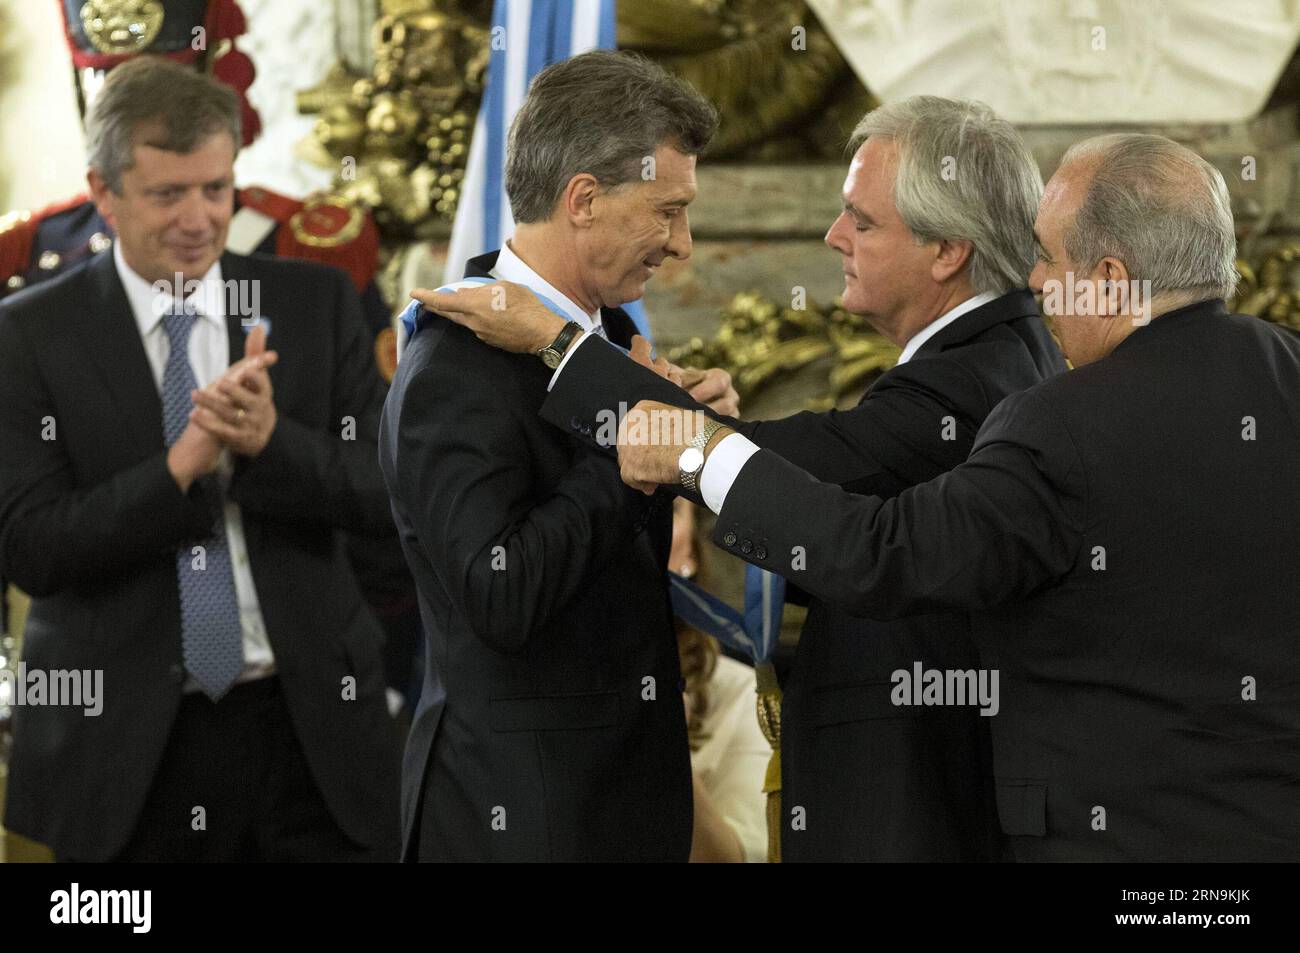 (151210) -- BUENOS AIRES, Dec. 10, 2015 -- Argentina s new President Mauricio Macri (2nd L) receives the presidential sash from the provisional President of the Argentine Senate Federico Pinedo (2nd R) at White Room of Casa Rosada (Pink House) in Buenos Aires city, capital of Argentina, on Dec. 10, 2015. Mauricio Macri on Thursday inaugurated as new Argentine President, succeeding Cristina Fernandez. Martin Zabala) (fnc) (ah) ARGENTINA-BUENOS AIRES-POLITICS-INAUGURATION e MARTINxZABALA PUBLICATIONxNOTxINxCHN   151210 Buenos Aires DEC 10 2015 Argentina S New President Mauricio Macri 2nd l recei Stock Photo